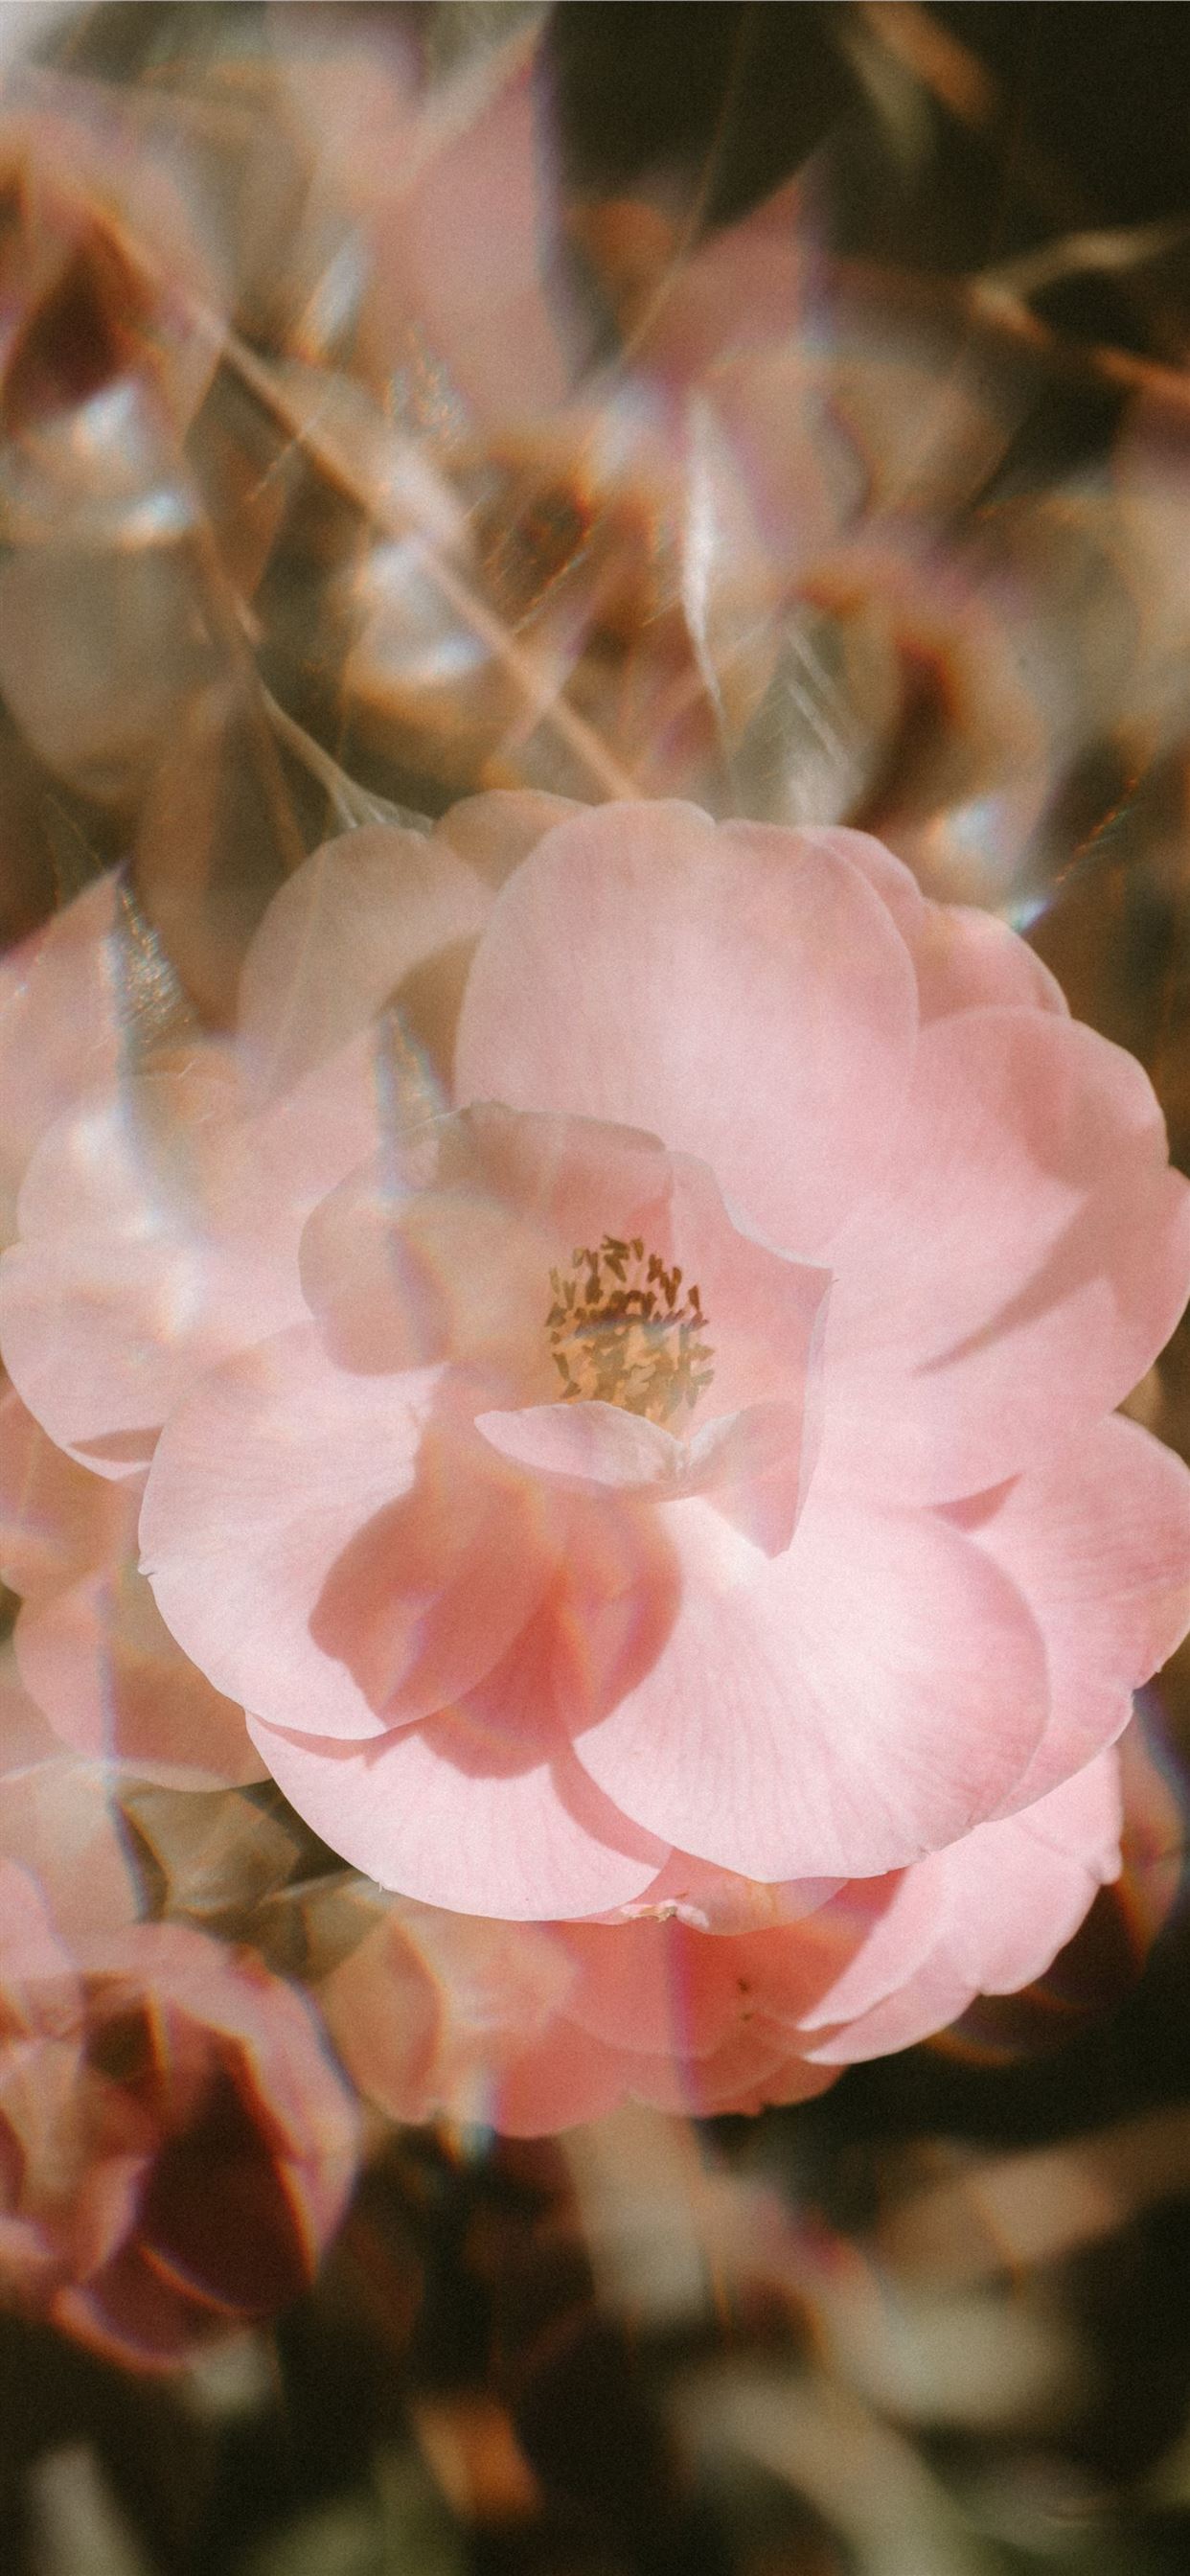 80000 Best Pink Flowers Images  100 Royalty Free Photo Downloads   Pexels  Free Stock Photos